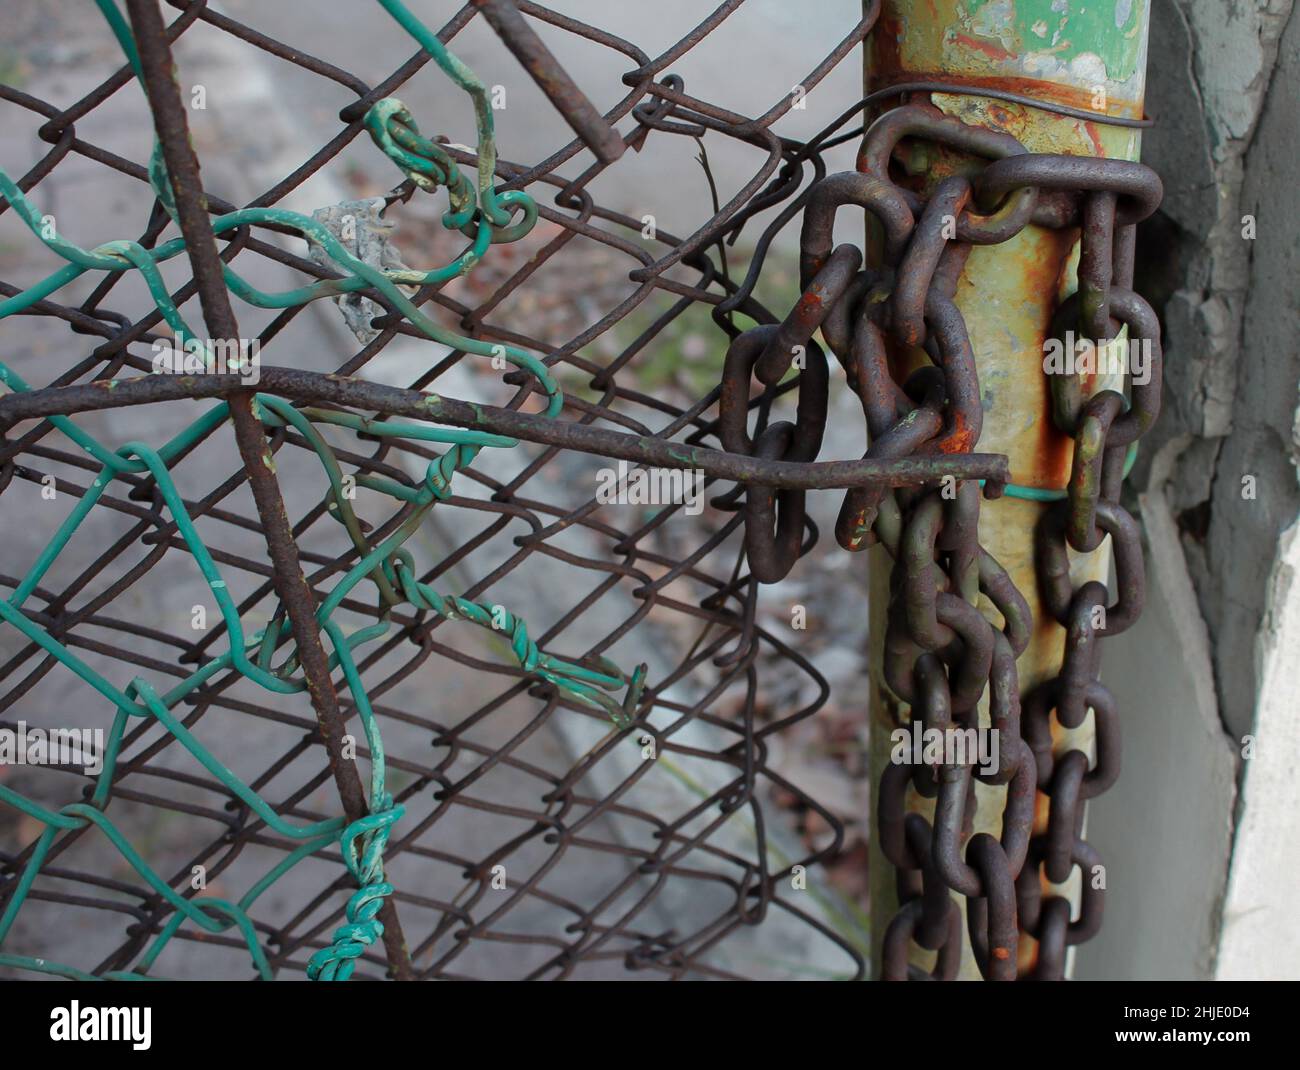 rivate property sign hangs on a metal fence. Gate is locked close with a chain and several padlocks. Stock Photo